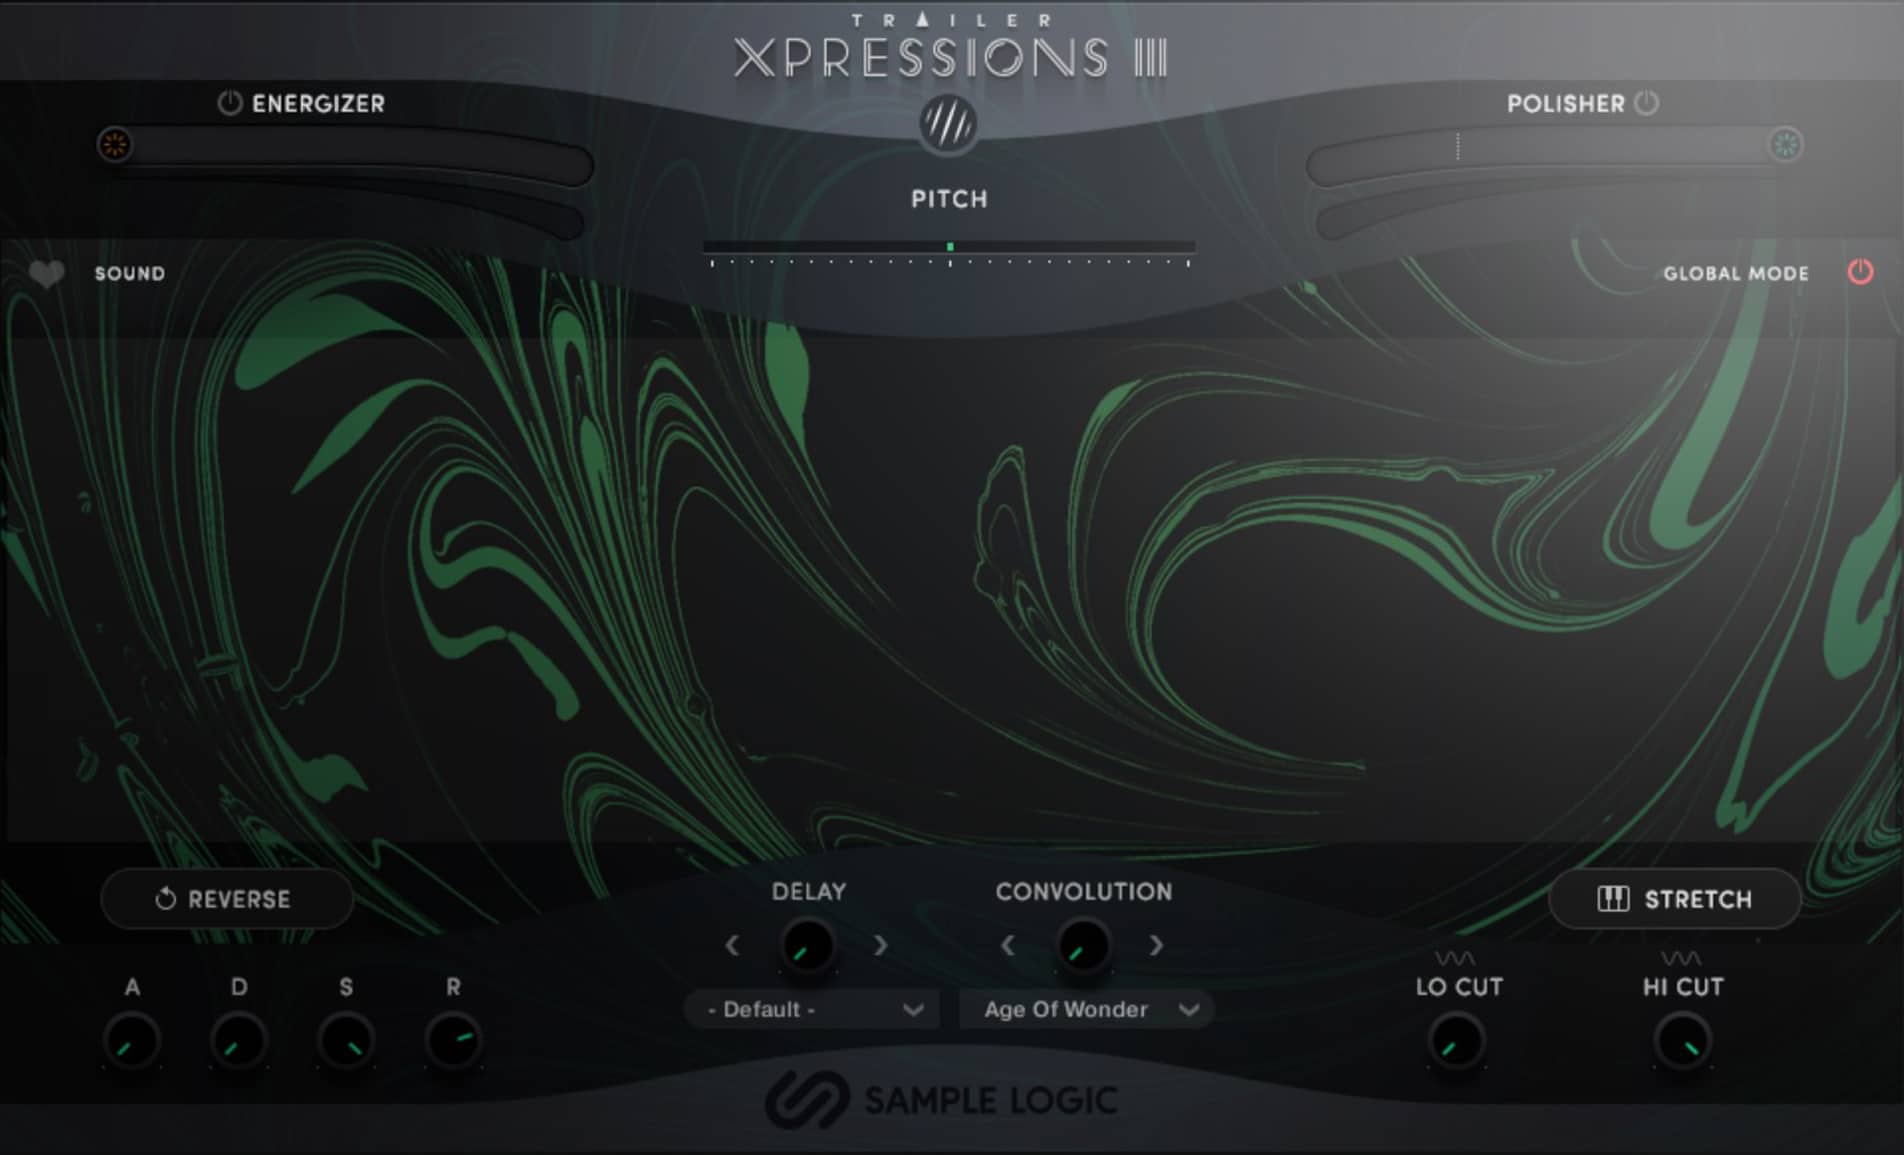 Sample Logic & SampleTraxx Introducing Trailer Xpressions 3 – Cinematic Sound Design Redefined